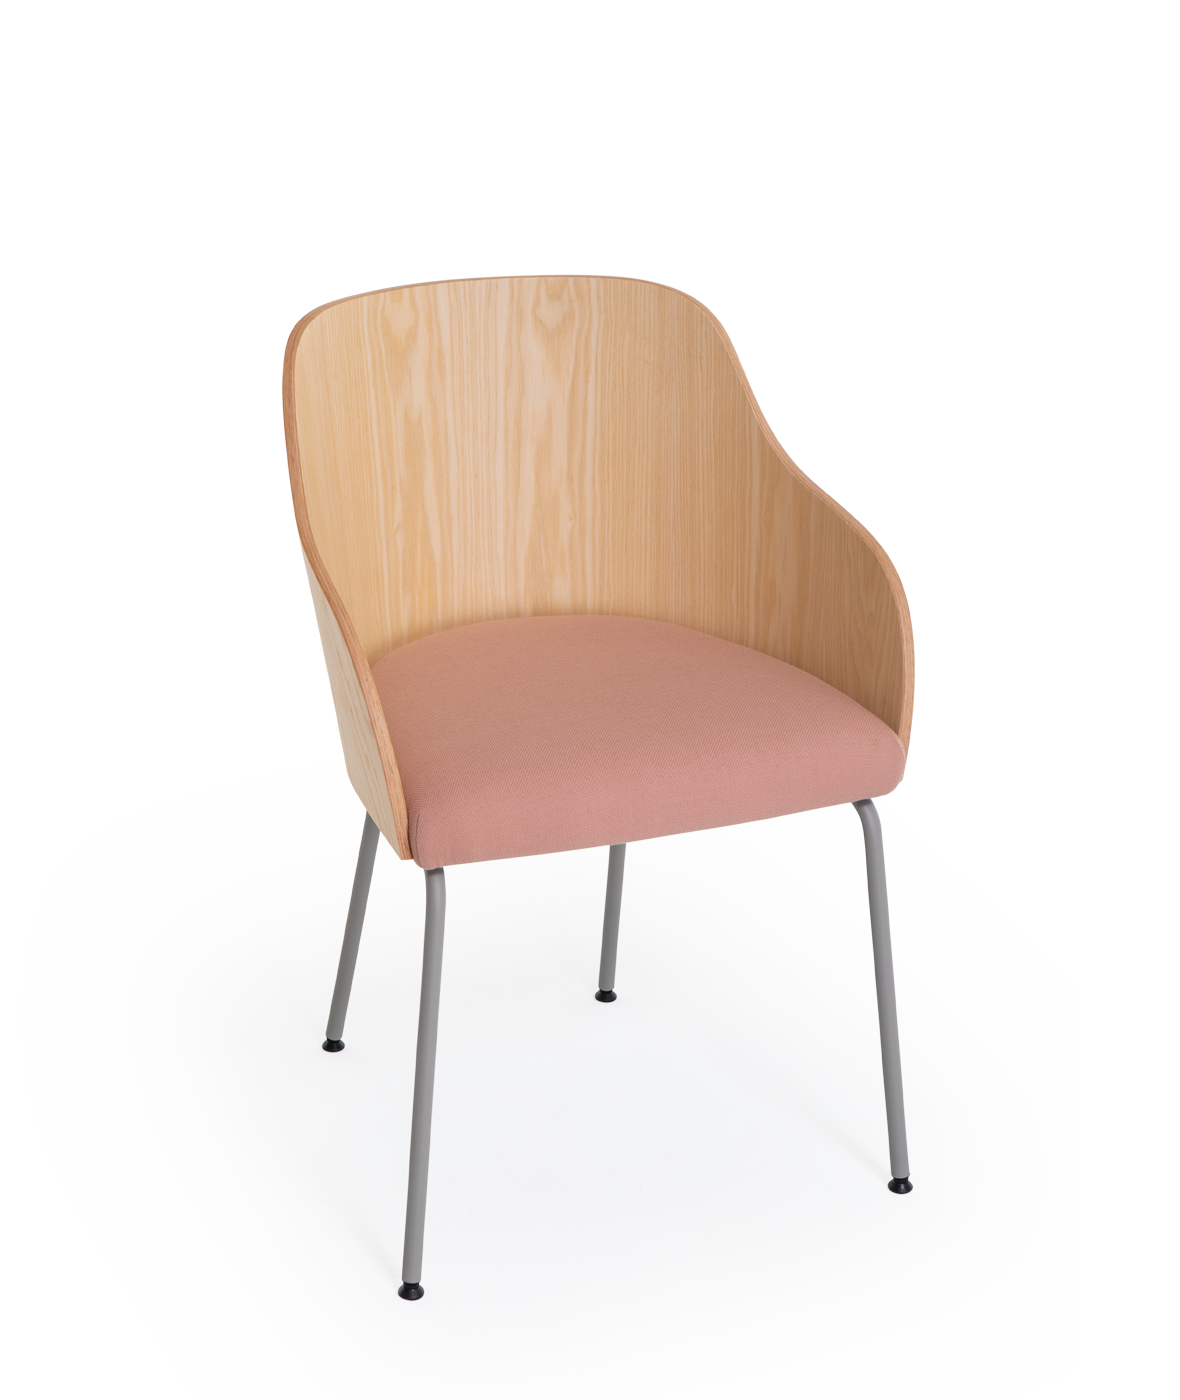 Cistell Curve chair with armrests and metallic legs - Vergés